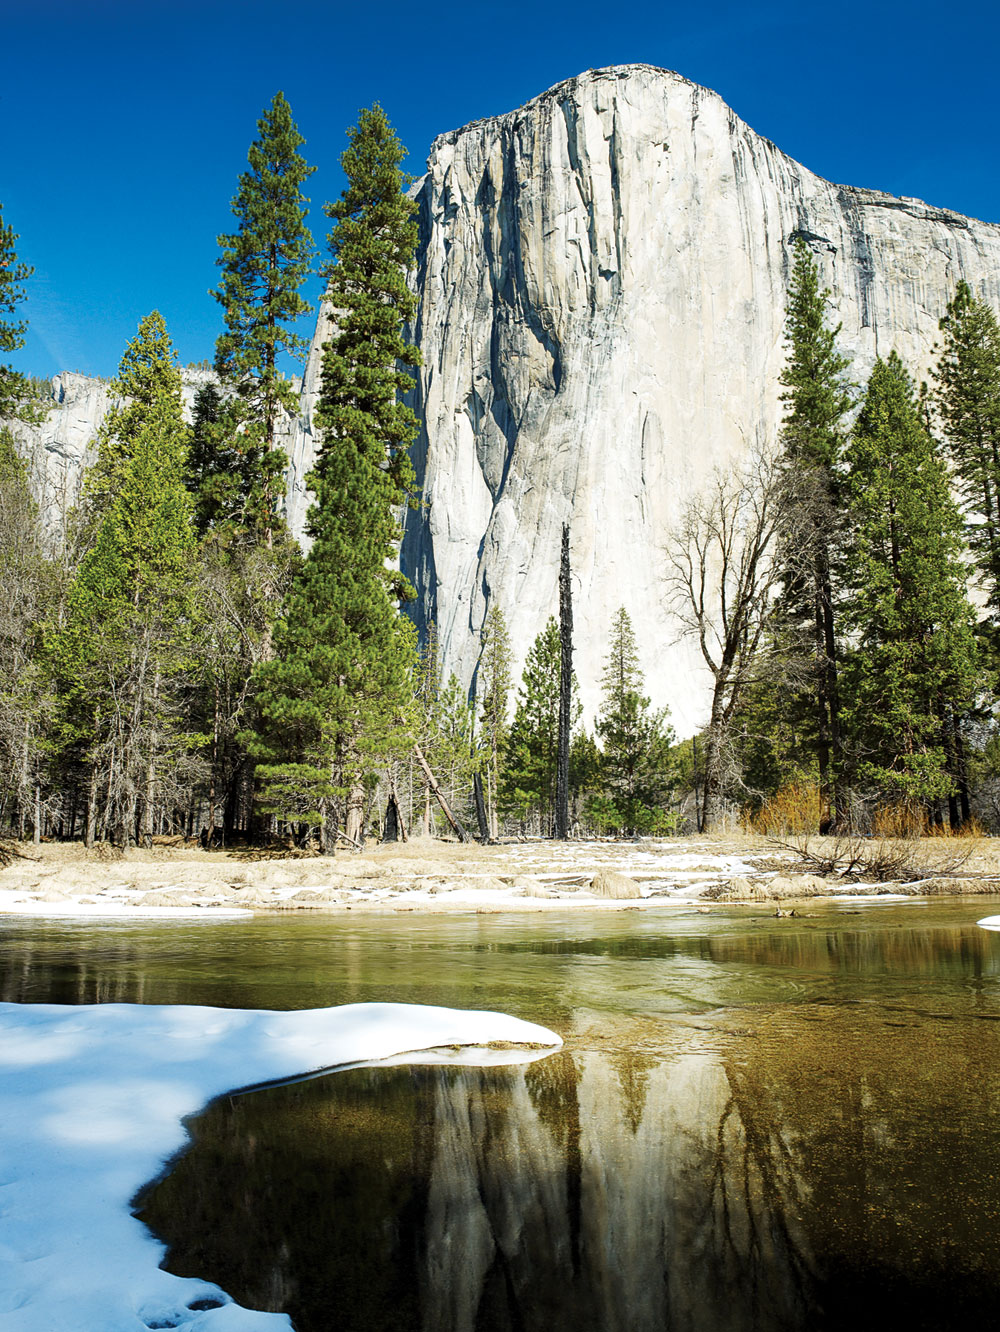 5 Things to Do in Yosemite with a Toddler